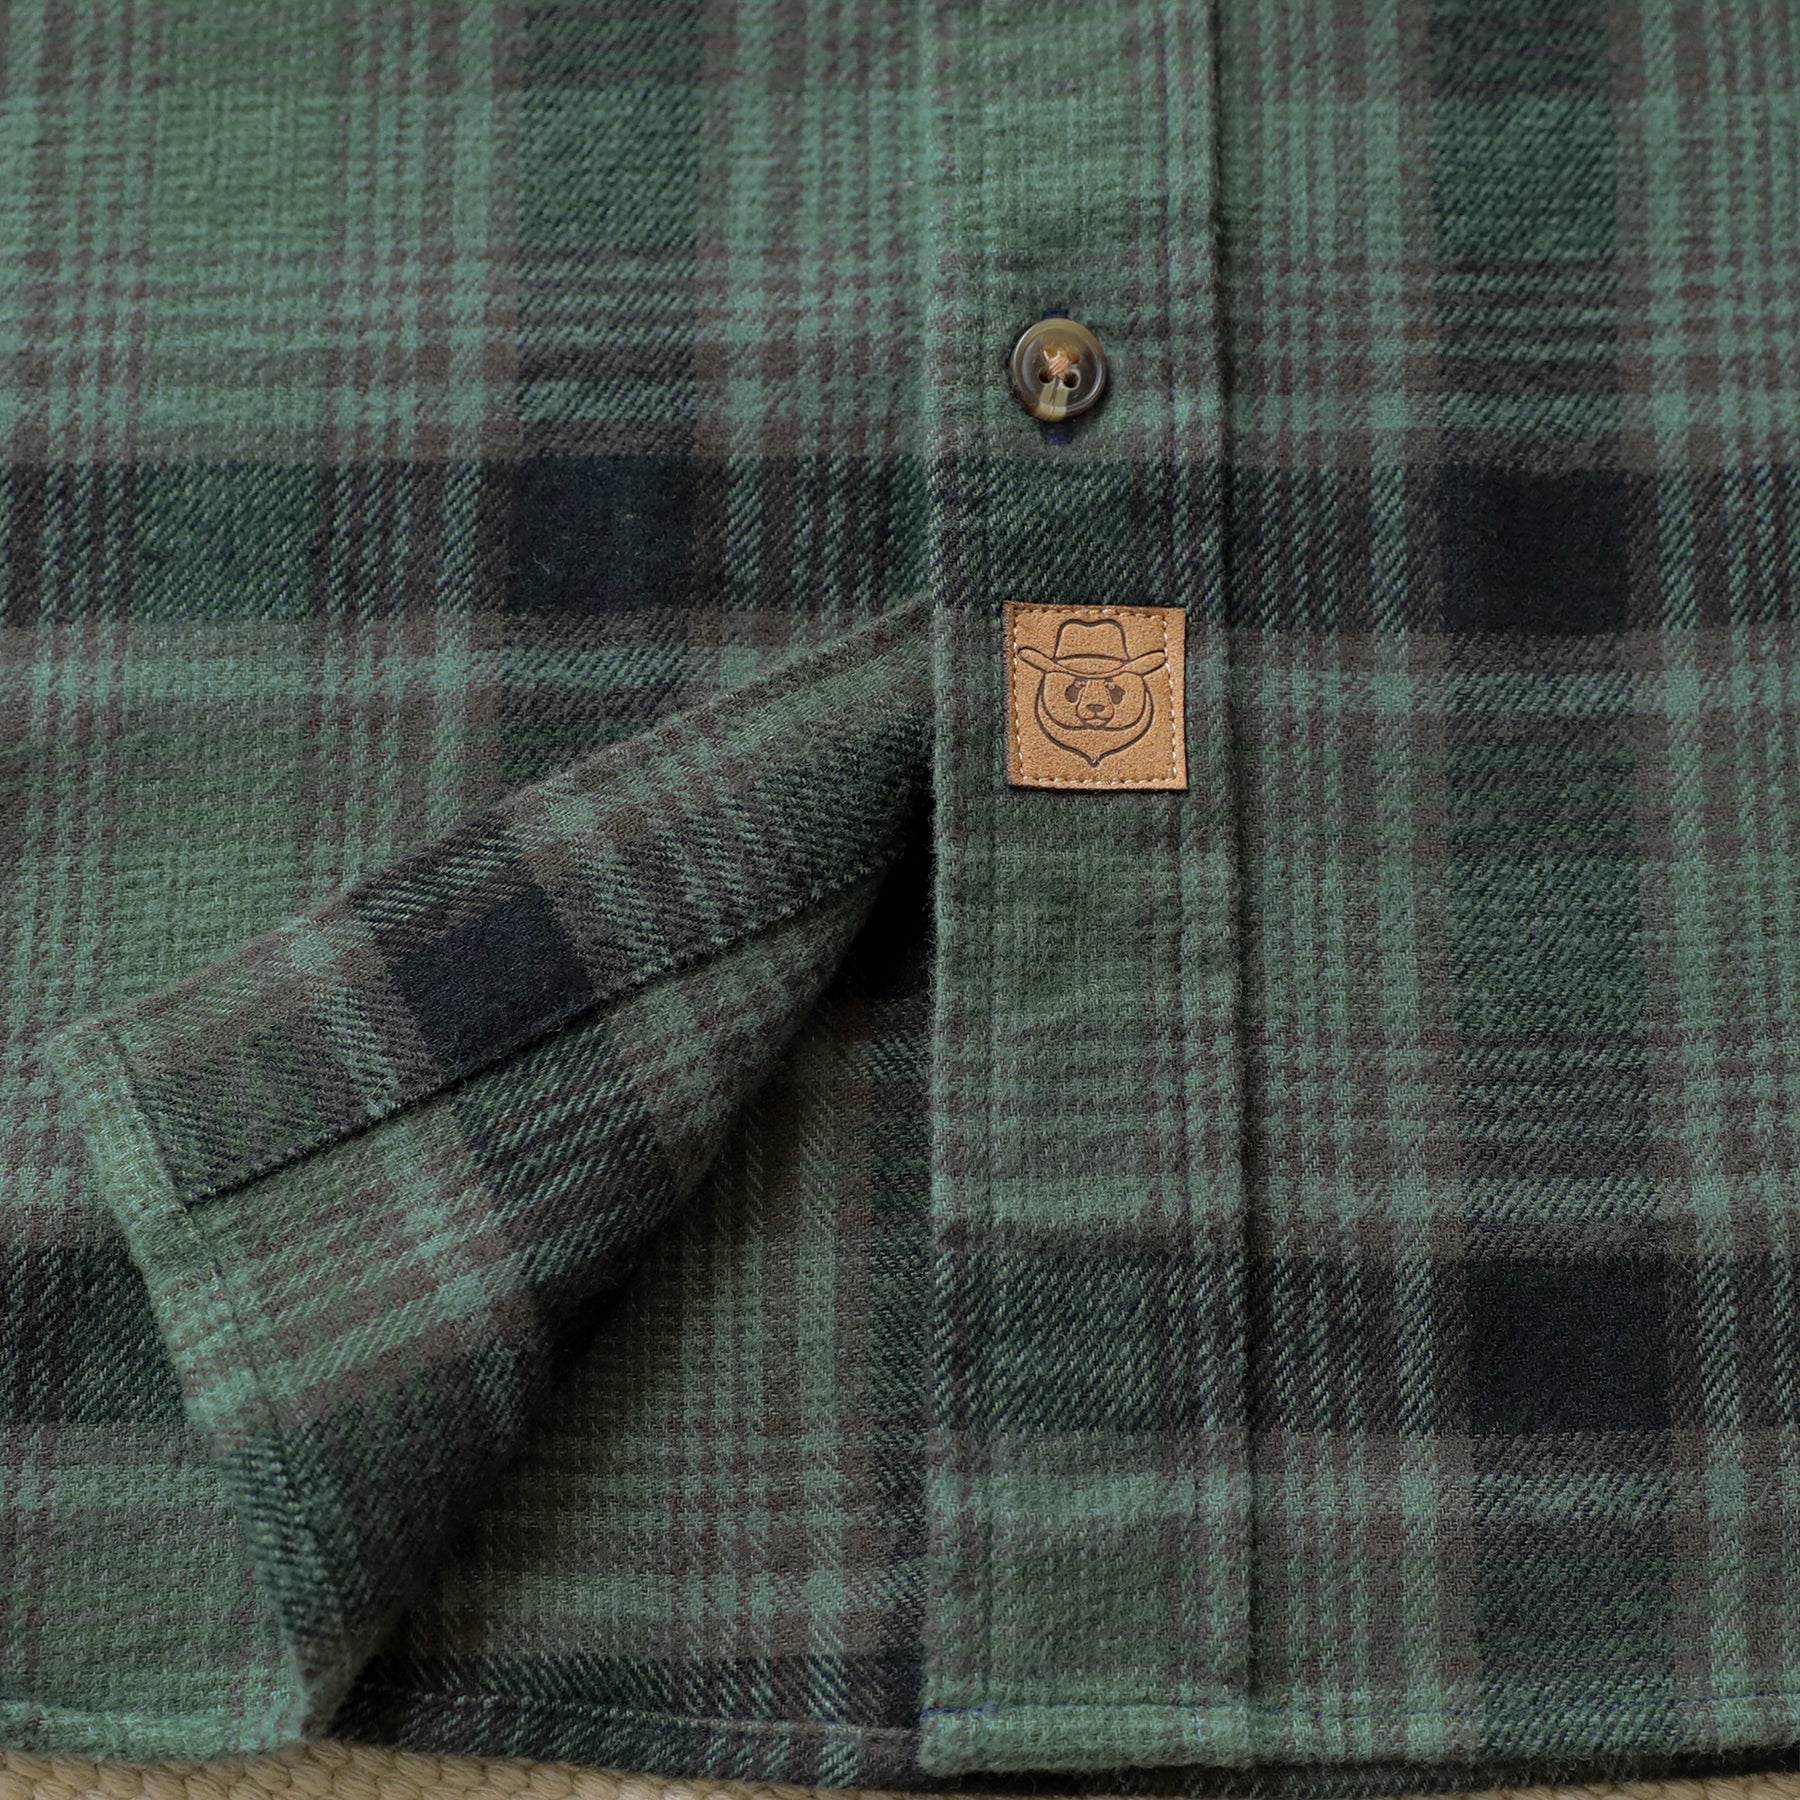 Mens Flannel Shirts Long Sleeve Casual #1014